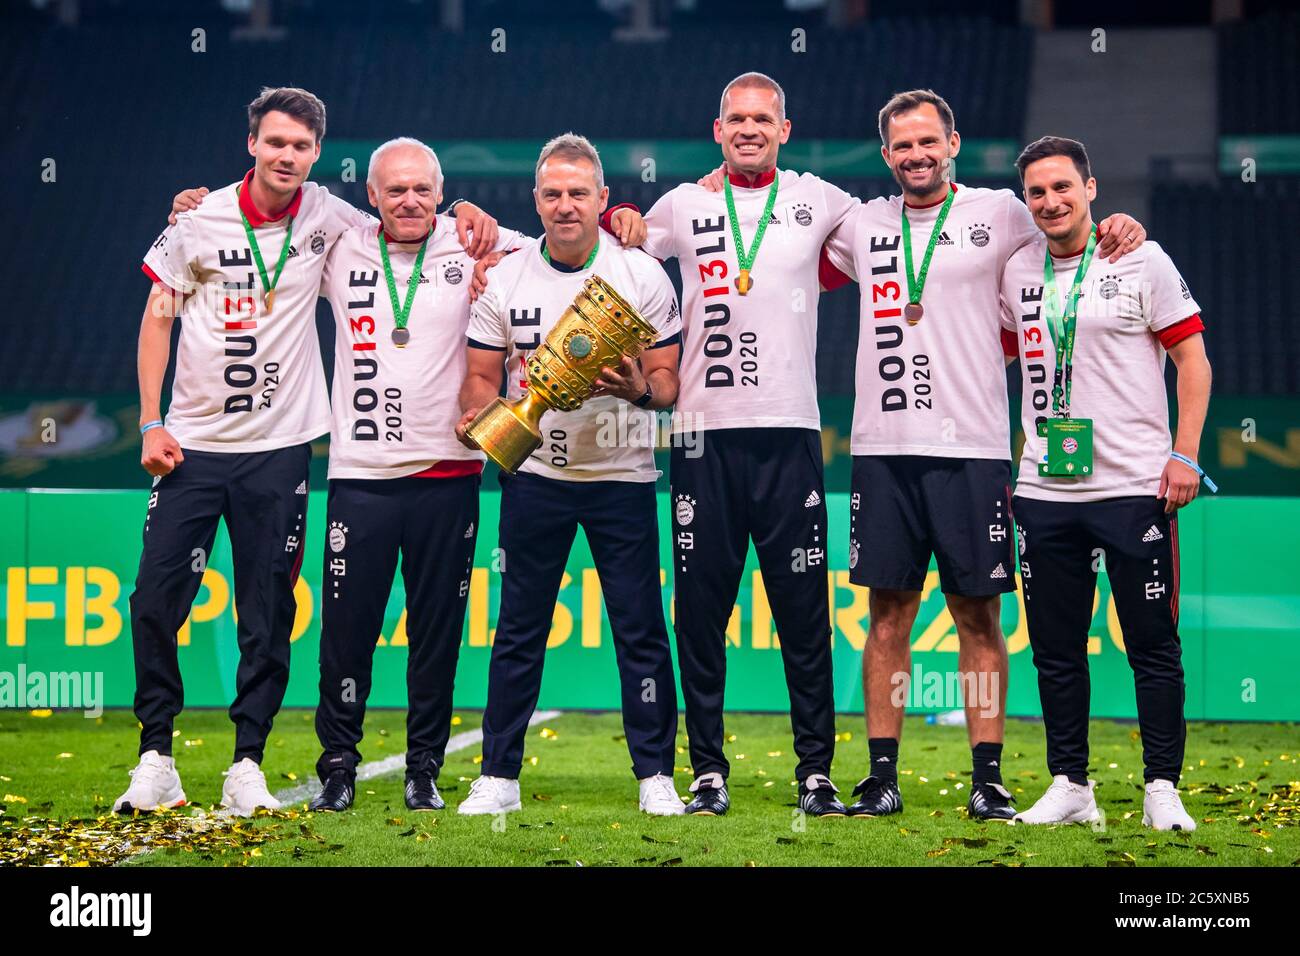 Berlin, Germany, 4 th July 2020,  Torwarttrainer Toni Tapalovic (Bayern München), Co-Trainer Hermann Gerland (Bayern München), Trainer Hans-Dieter Flick (Bayern München), Konditionstrainer Holger Broich, Co-Trainer Danny Röhl (Bayern München), Fitnesstrainer Simon Martinello (FC Bayern München)with trophy at the DFB Pokal Final match  FC BAYERN MUENCHEN - BAYER 04 LEVERKUSEN 4-2  in season 2019/2020 , FCB Foto: © Peter Schatz / Alamy Live News / Kevin Voigt/Jan Huebner/Pool   - DFB REGULATIONS PROHIBIT ANY USE OF PHOTOGRAPHS as IMAGE SEQUENCES and/or QUASI-VIDEO -  National and international N Stock Photo